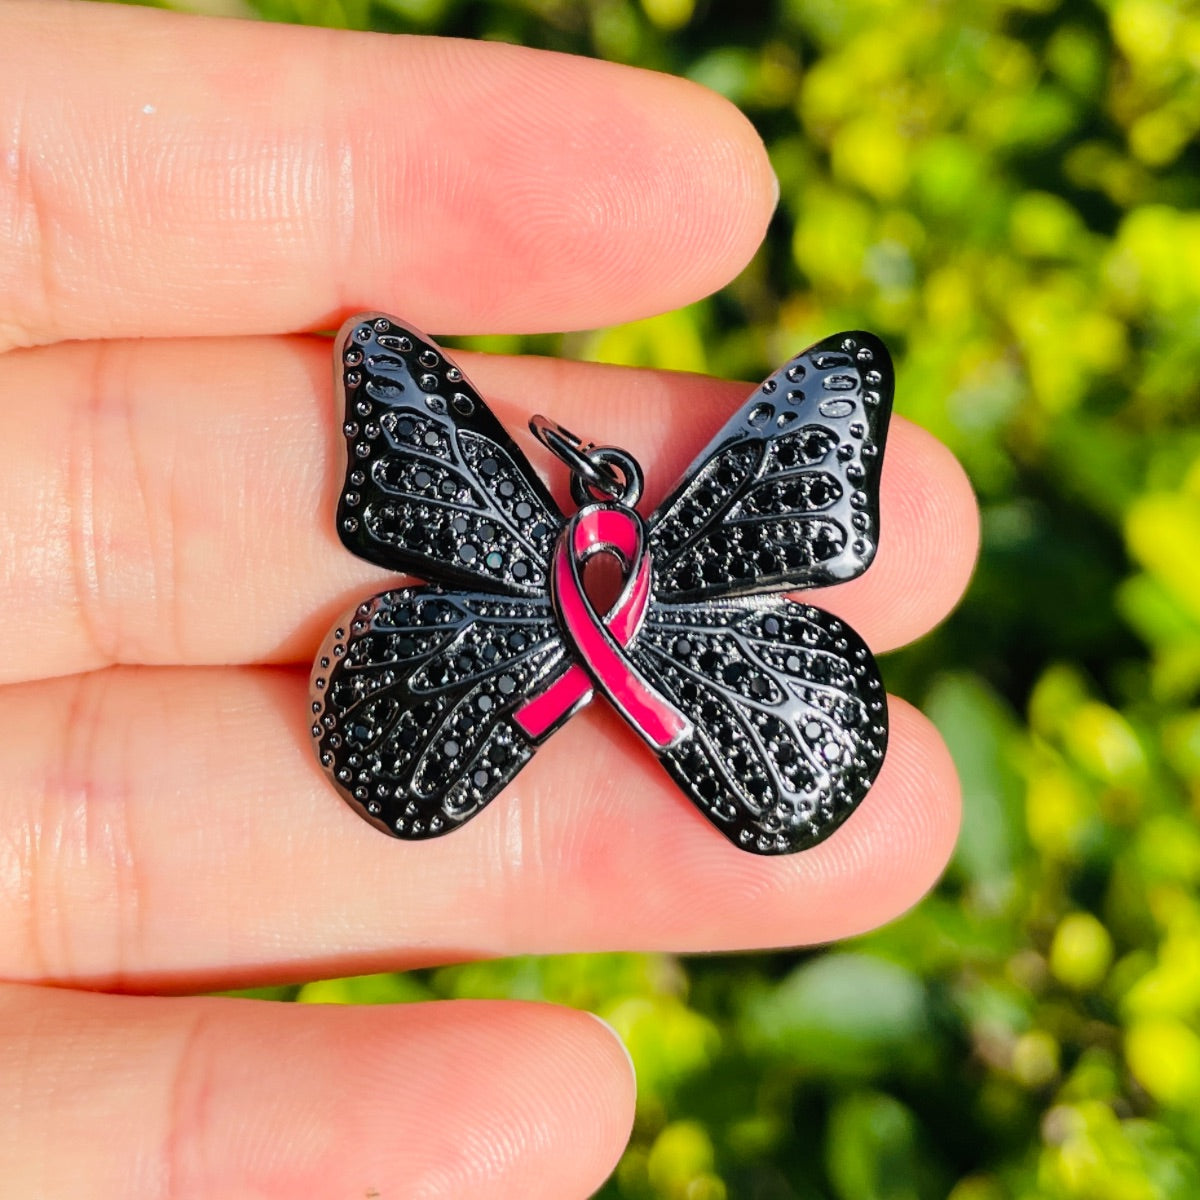 10pcs/lot CZ Pave Pink Ribbon Butterfly Charms - Breast Cancer Awareness Black on Black CZ Paved Charms Breast Cancer Awareness Butterflies New Charms Arrivals Charms Beads Beyond